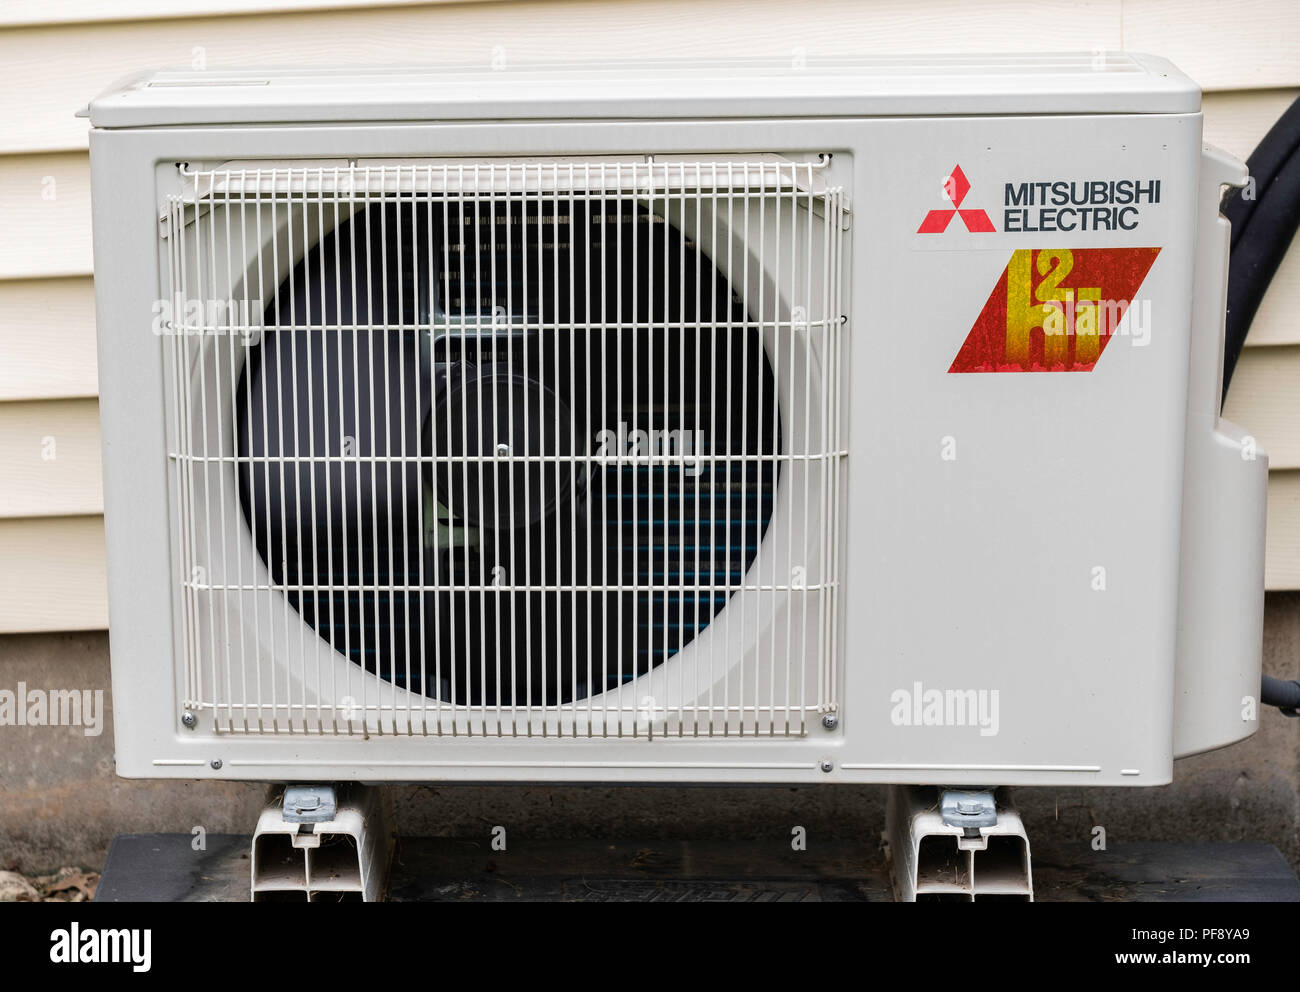 A Mitsubishi Electric 2 Hi Heating And Cooling Unit Suitable For One Room Air Control Usa Stock Photo Alamy